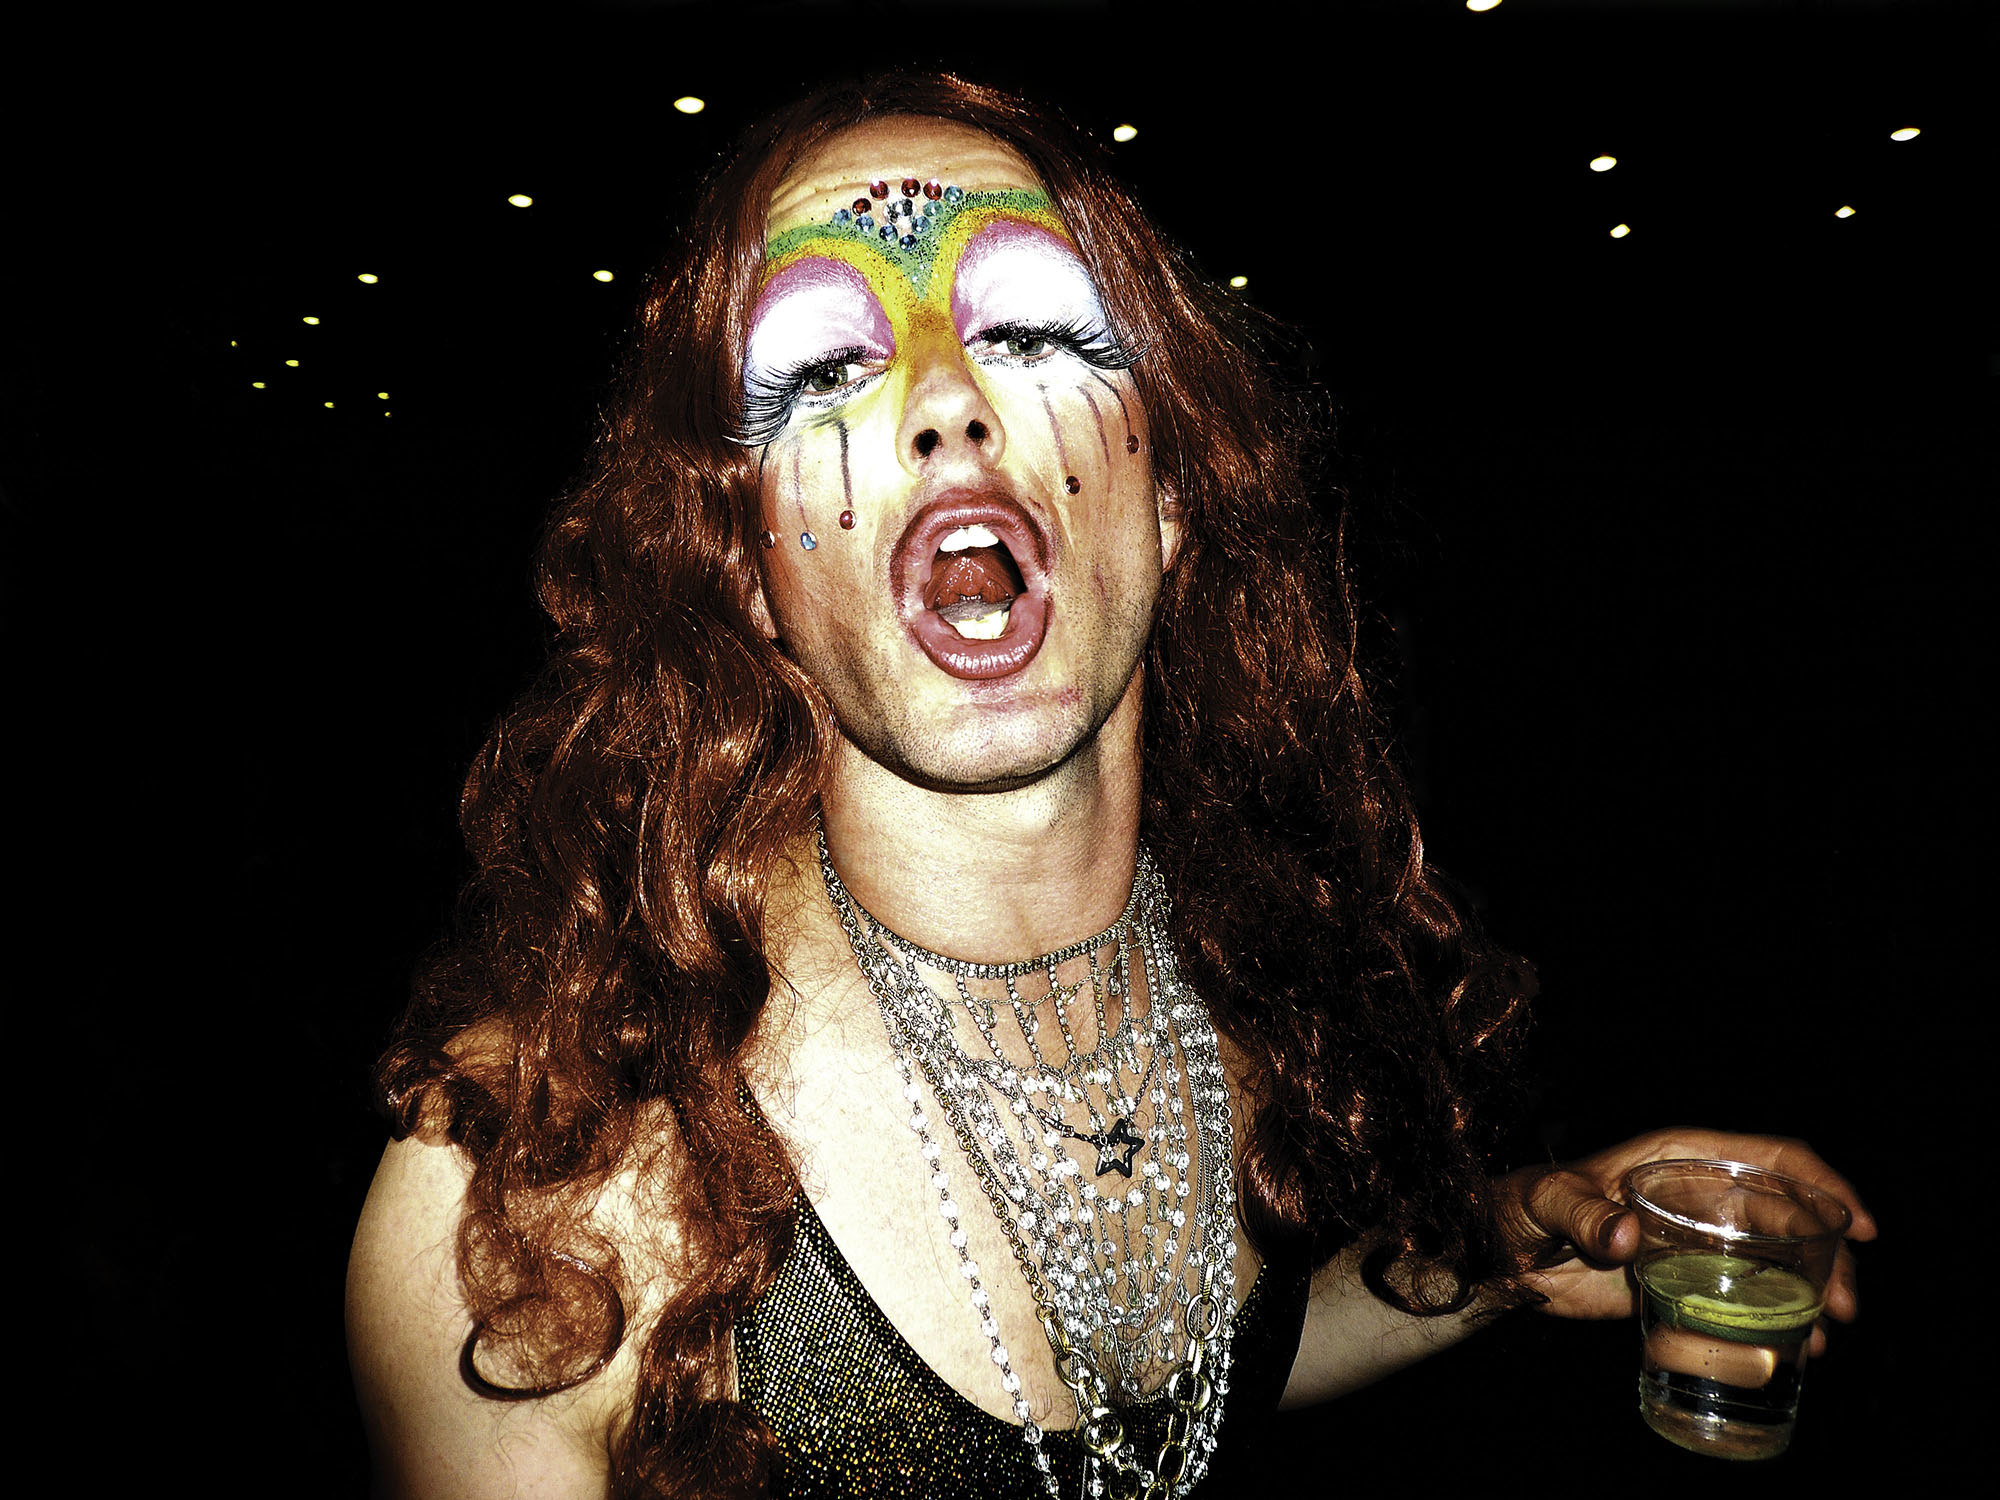 A man in drag holding a drink yells at the camera